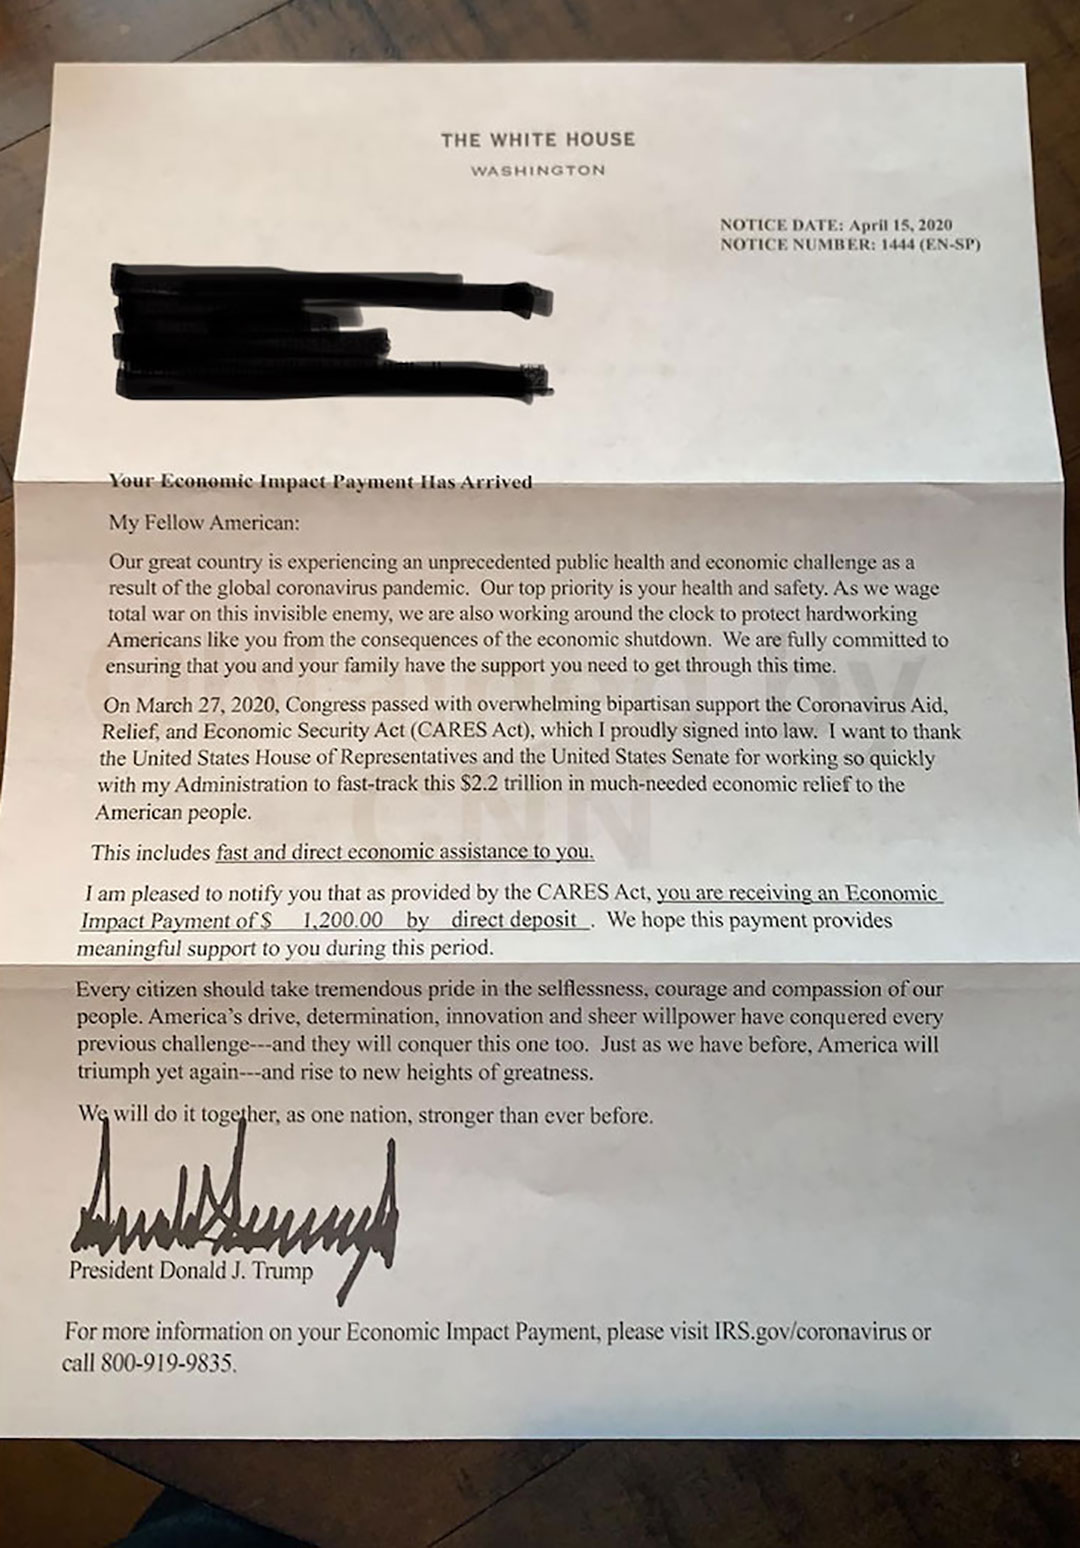 A letter from President Donald Trump to citizens about the stimulus payments. 